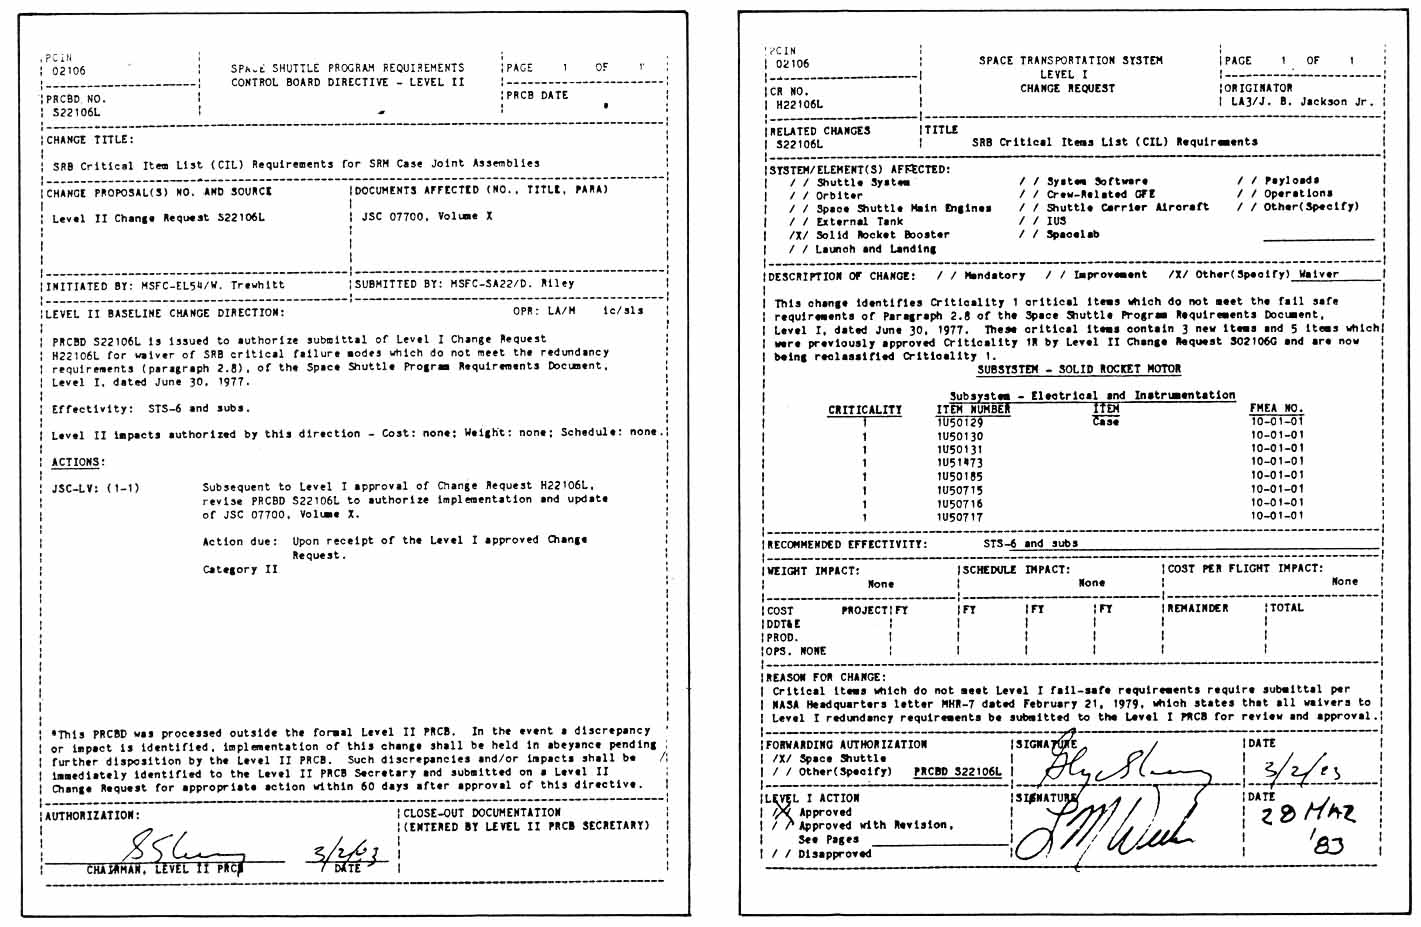 After receiving written concurrence from certain Johnson organizations, Glynn Lunney, the Shuttle Program Manager, approved the Criticality change, based on a telephone conversation with Lawrence Mulloy, the Solid Rocket Booster Project Manager. The action was taken without convening a meeting of the Program Requirements Control Board. This action authorized submittal of a waiver of the fail-safe 